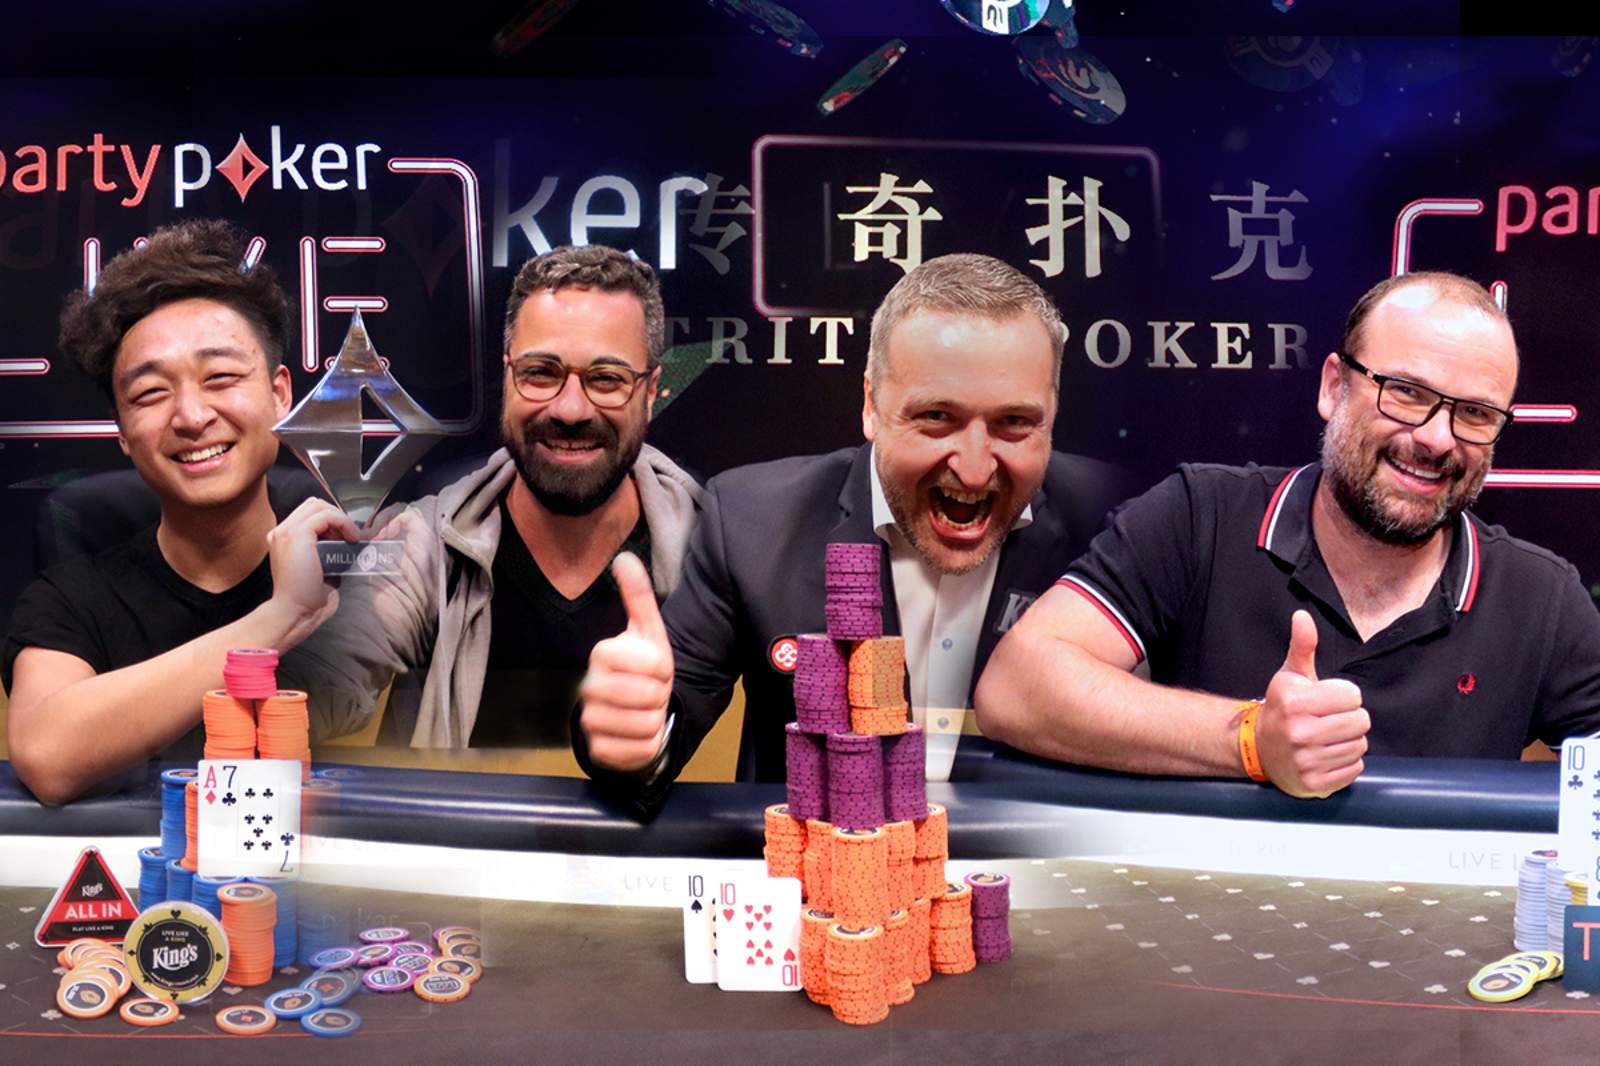 Life-Changing Money Won at the partypoker MILLIONS Europe Festival